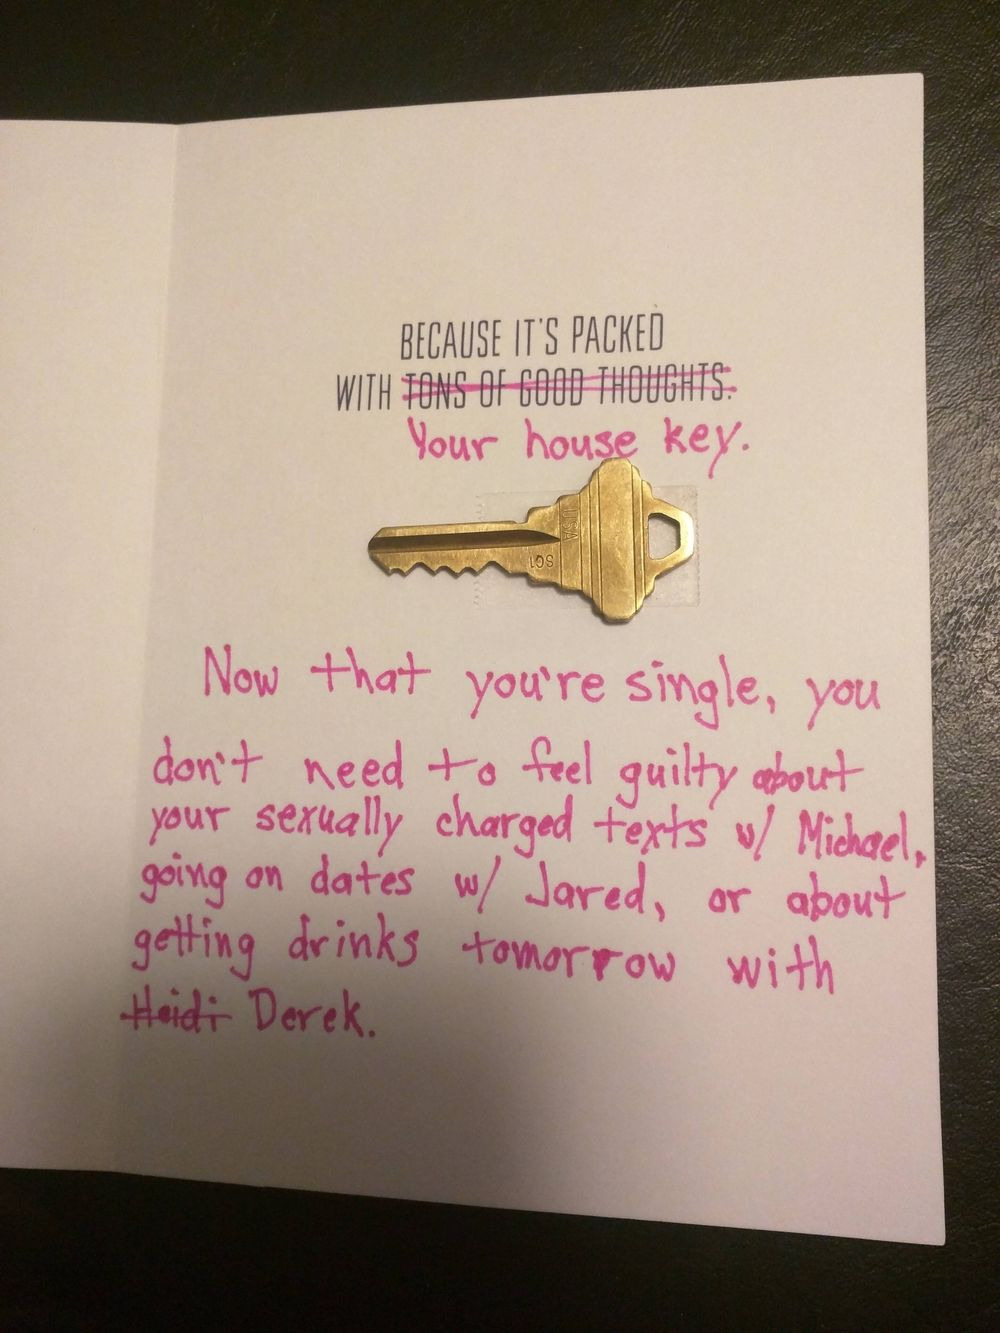 Guy being cheated on gets revenge in a birthday card